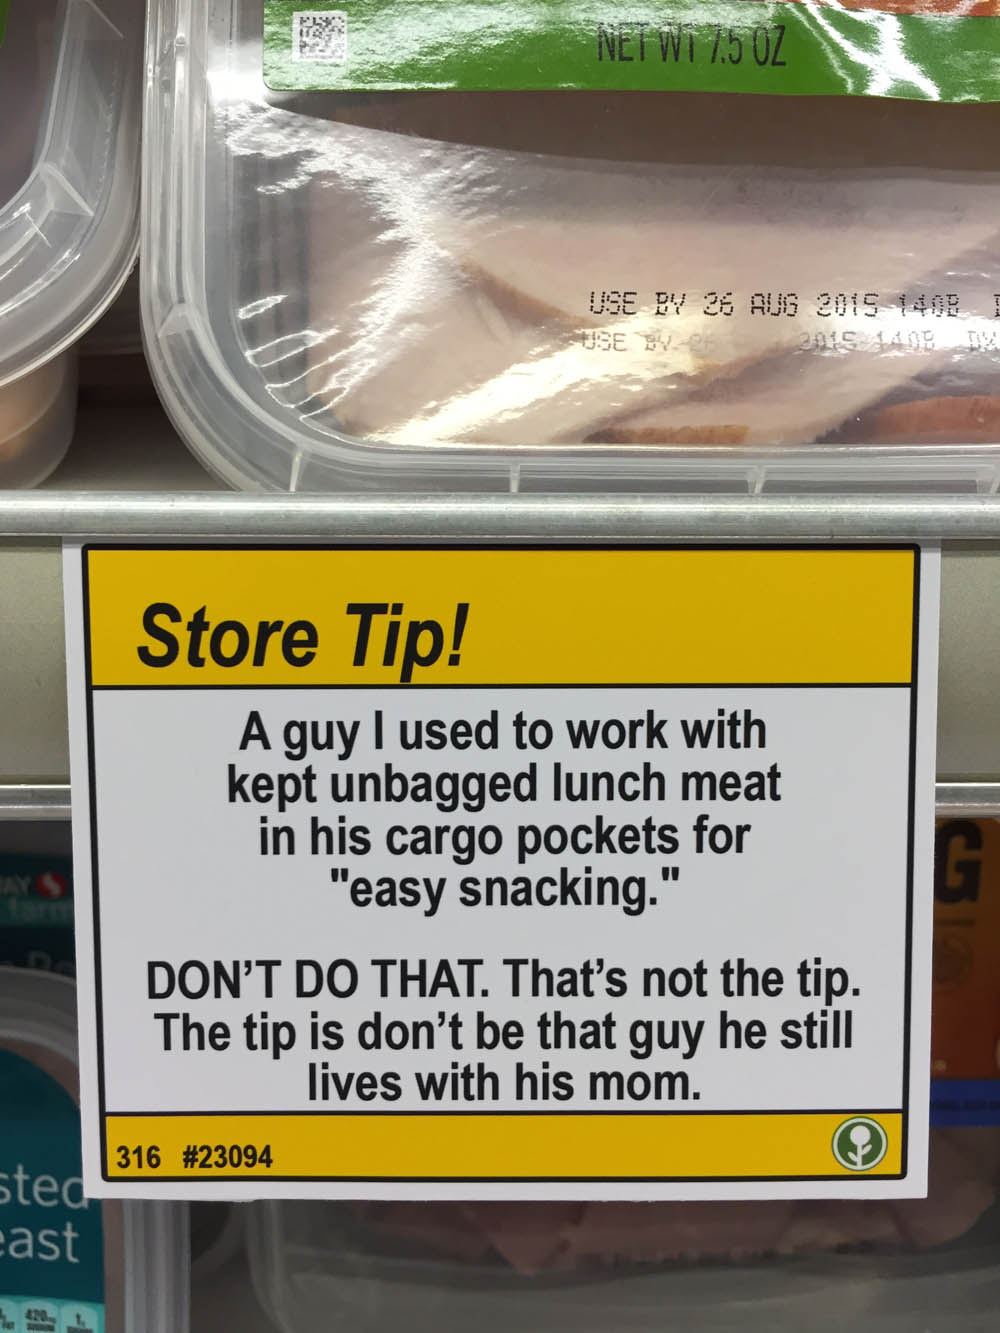 store tips - Use By 0BI Store Tip! A guy I used to work with kept unbagged lunch meat in his cargo pockets for "easy snacking." Don'T Do That. That's not the tip. The tip is don't be that guy he still lives with his mom. 316 sted cast